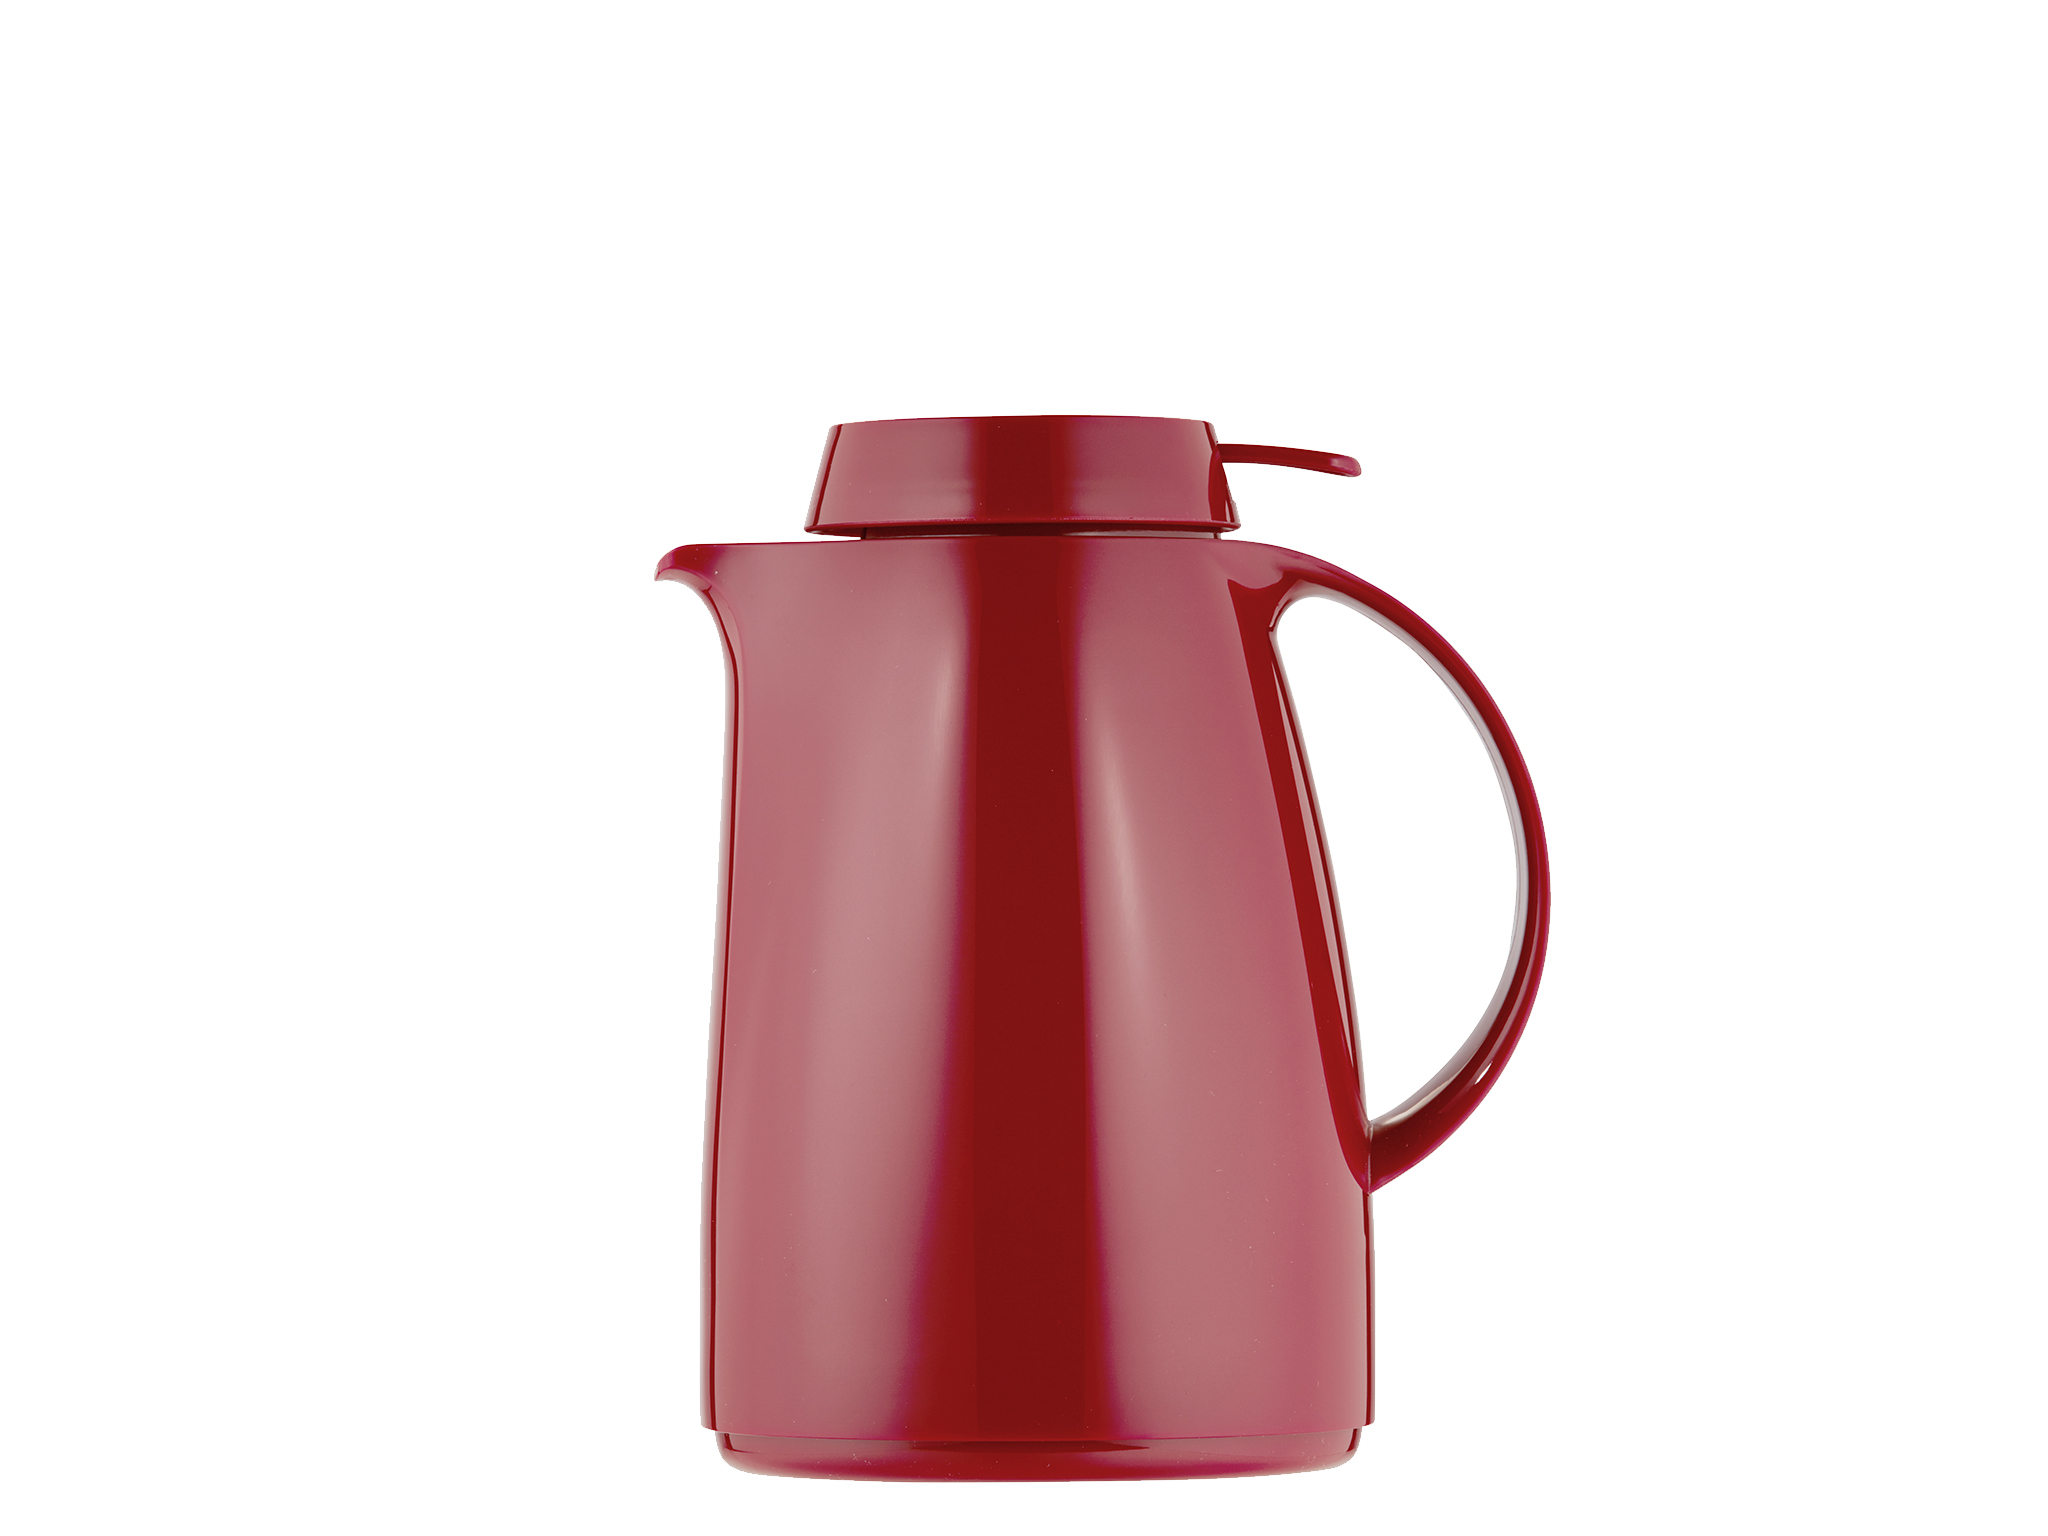 7204-046 - Vacuum carafe red 1.0 L SERVITHERM - Helios